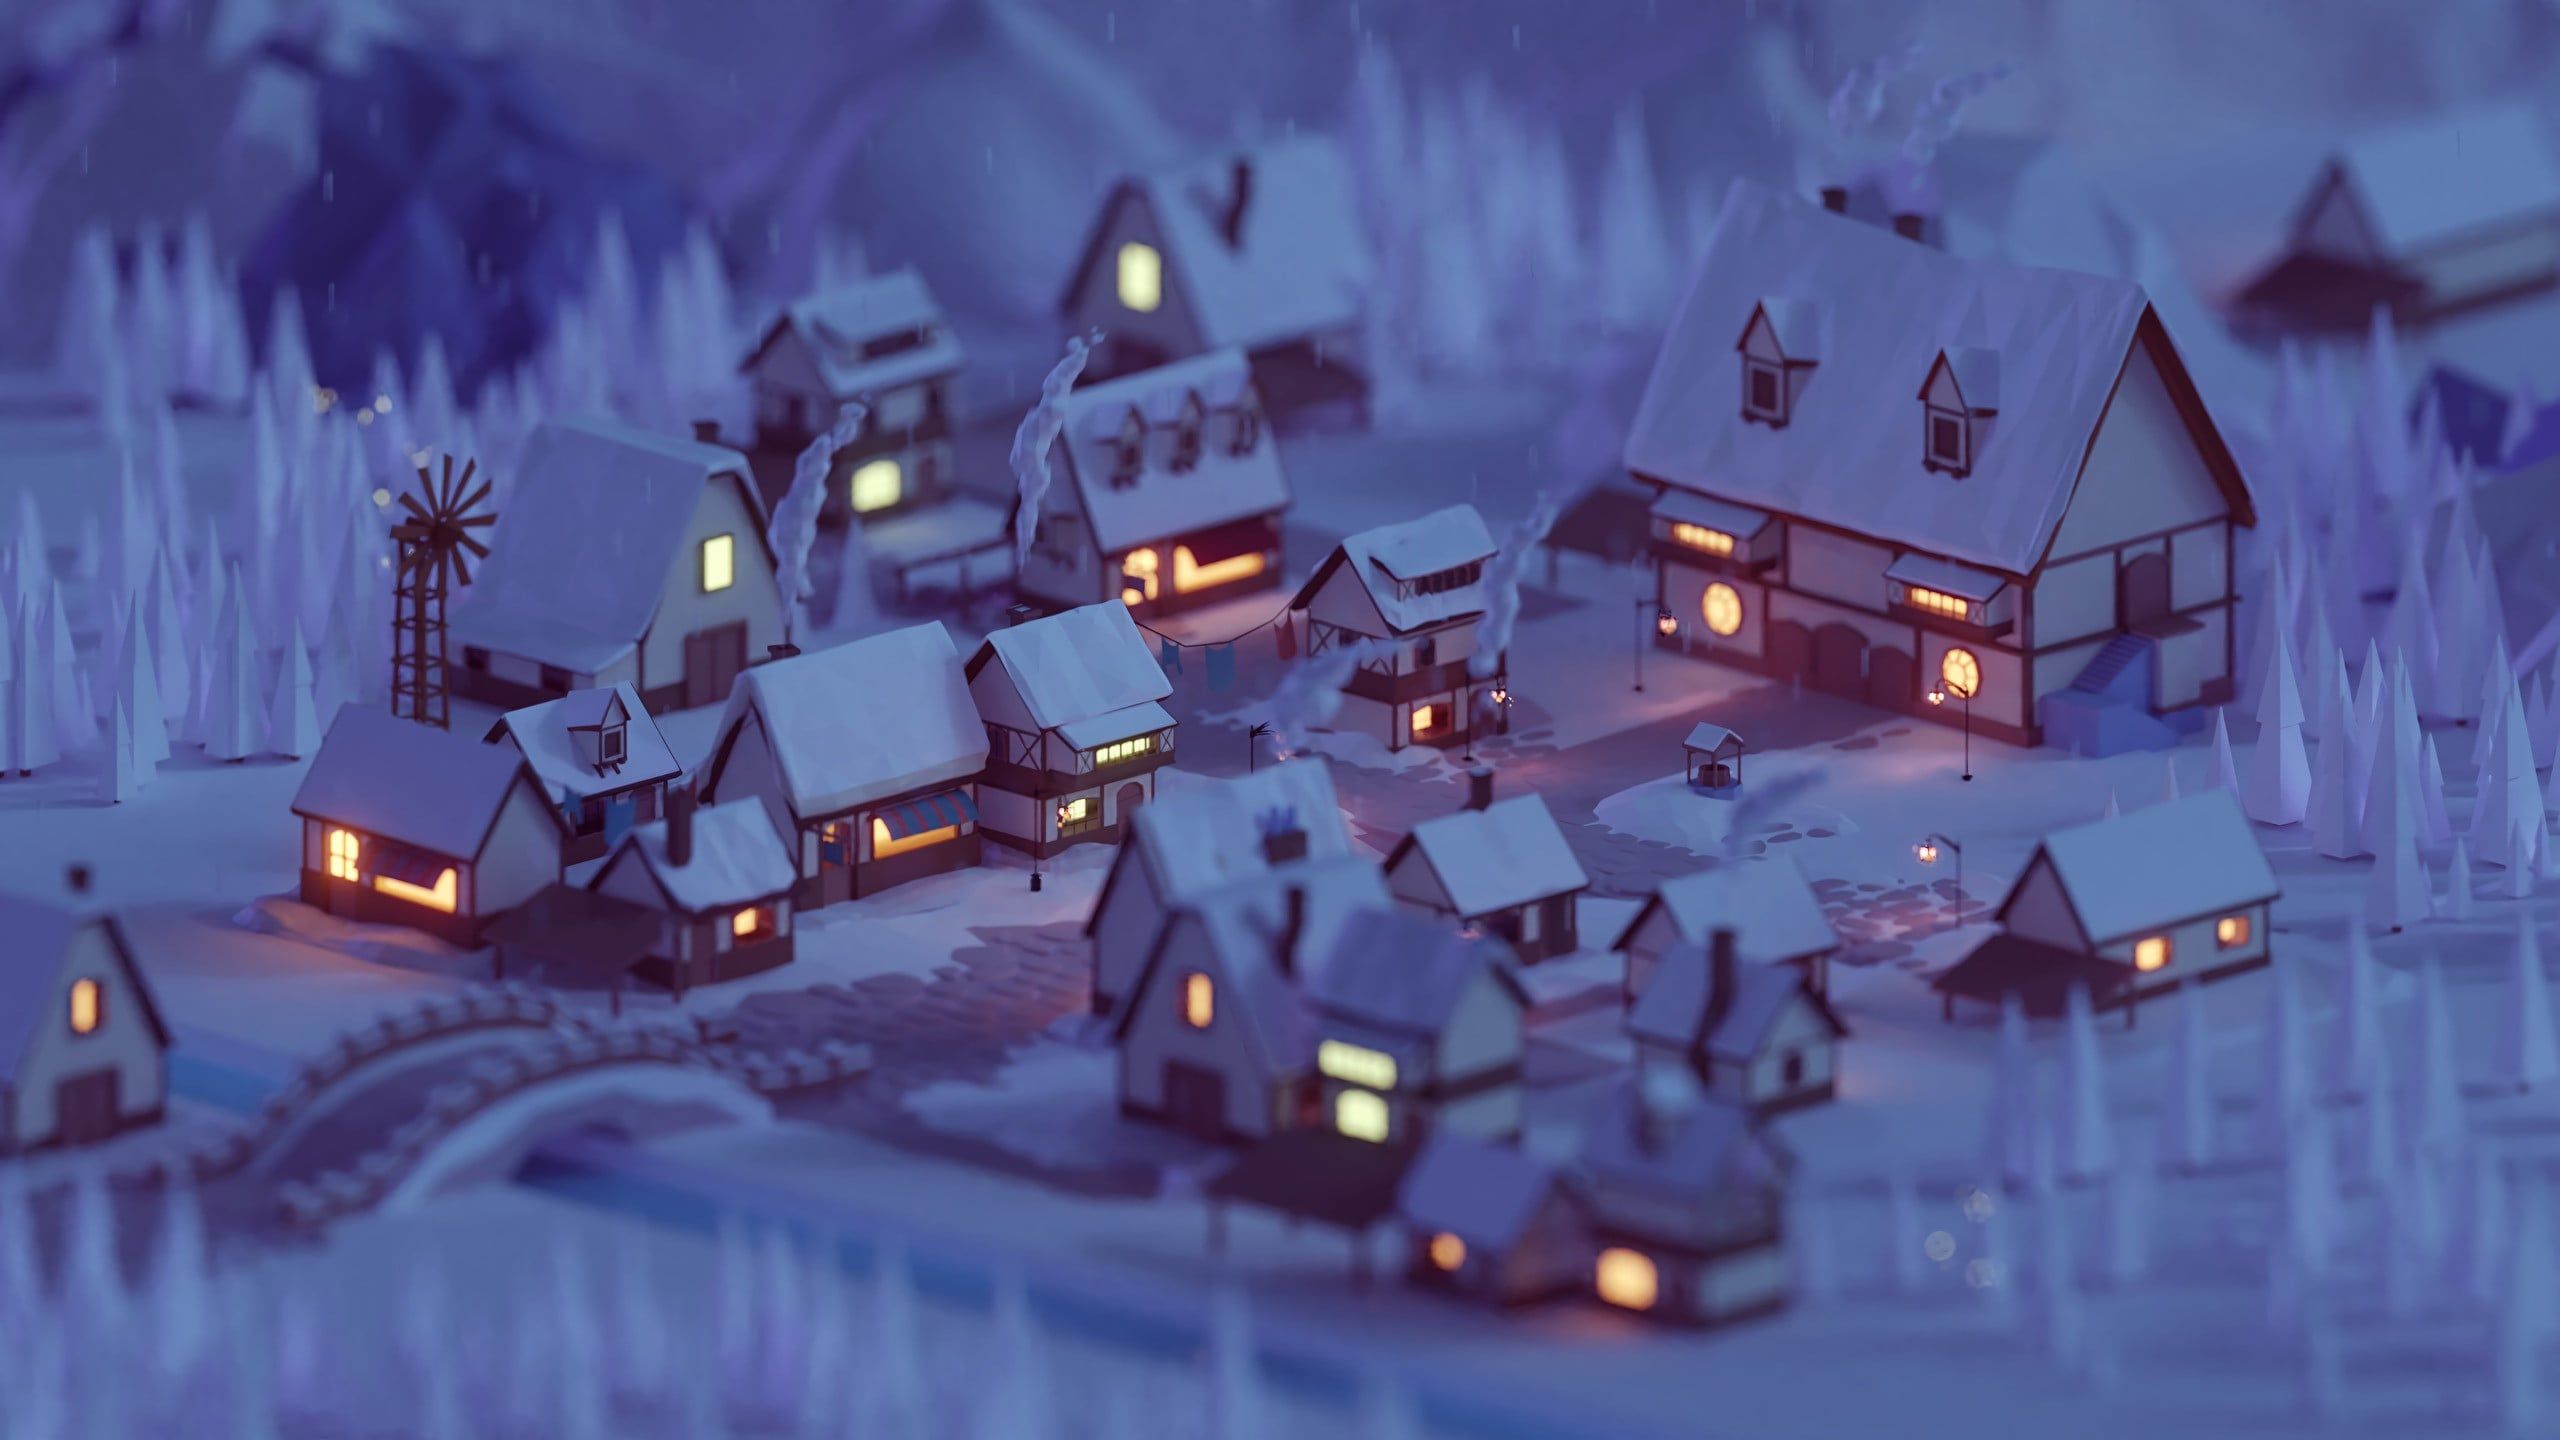 Low Poly Christmas Village 2560x1440